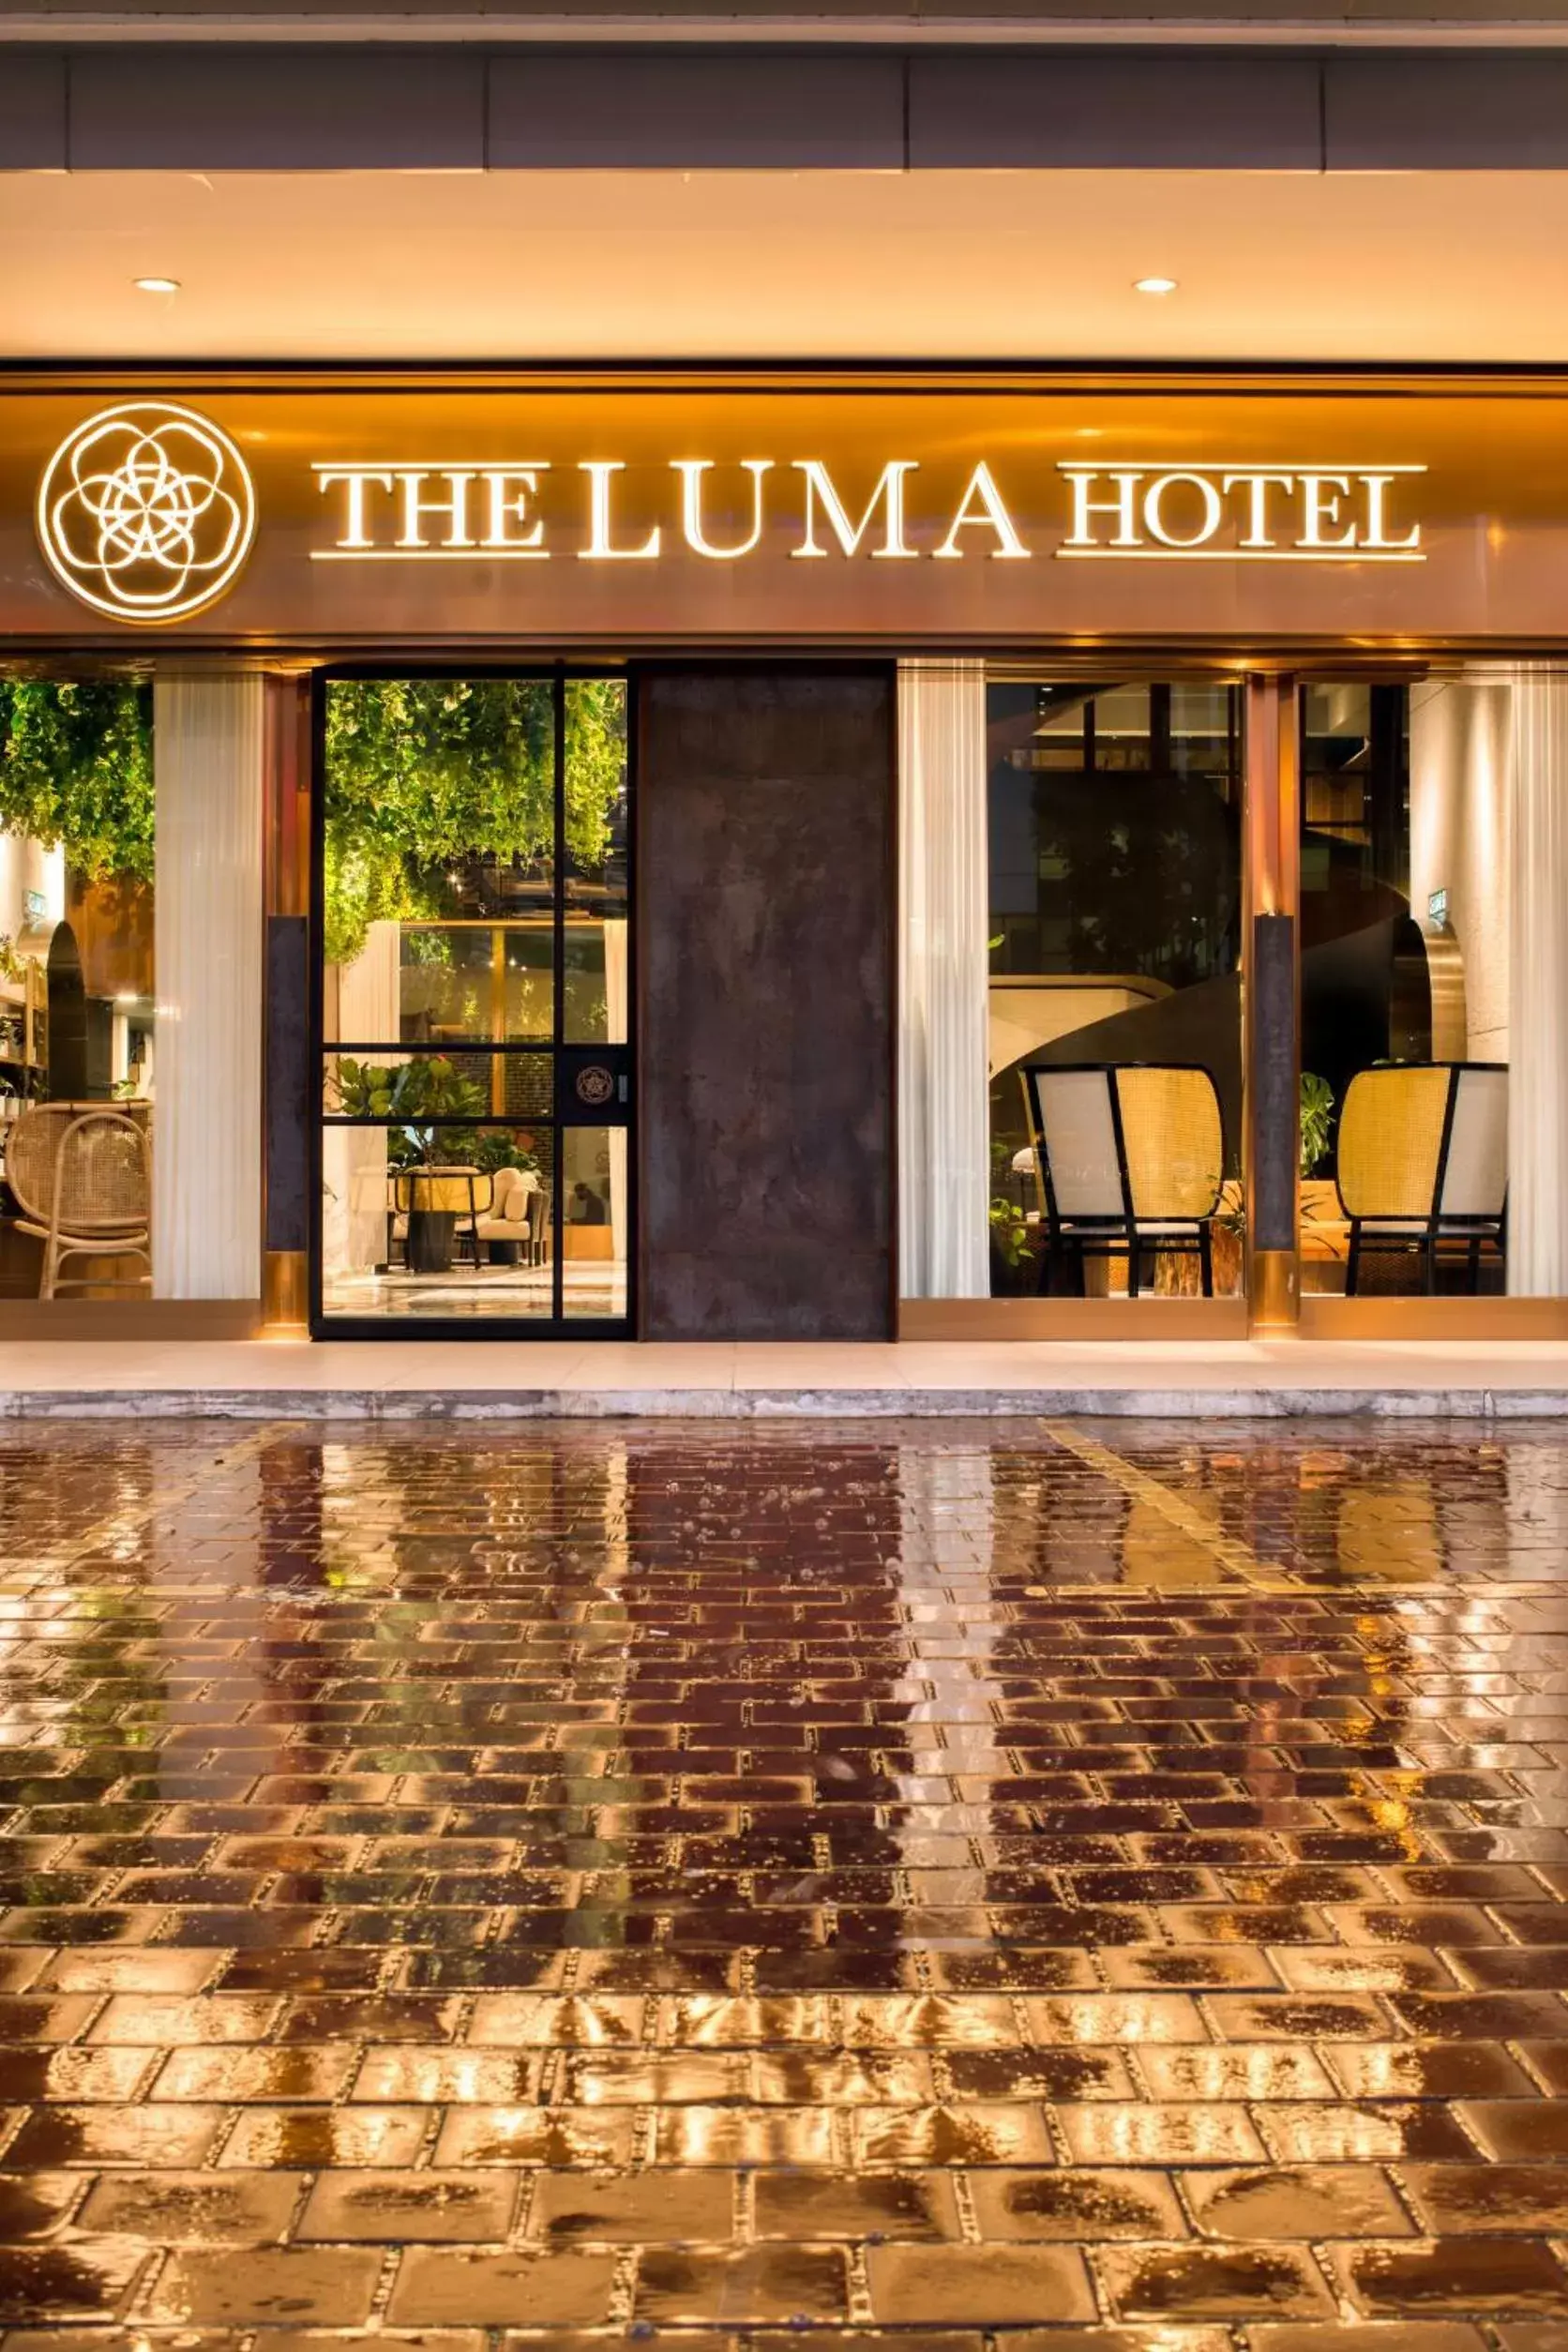 Property building in The LUMA Hotel, a Member of Design Hotels